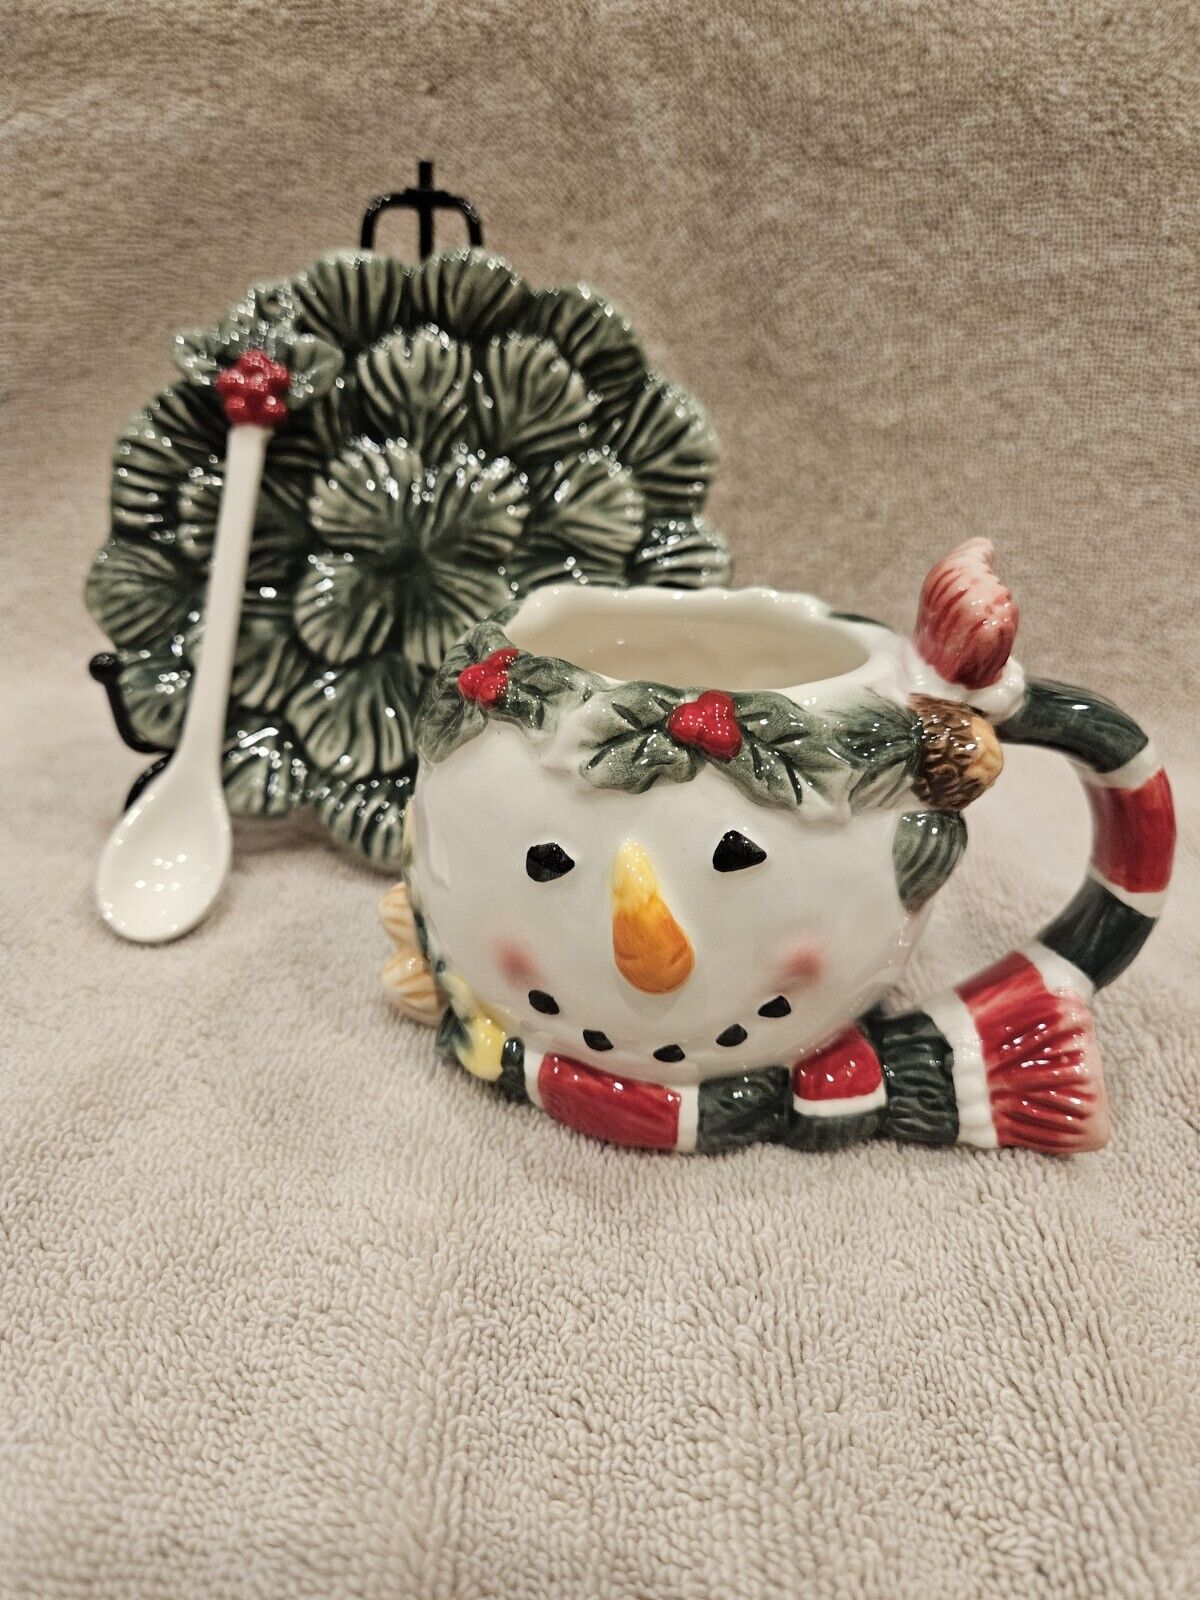 Corner Ruby CR Teacup Ridgefield Christmas Holiday Collection Detailed Snowman